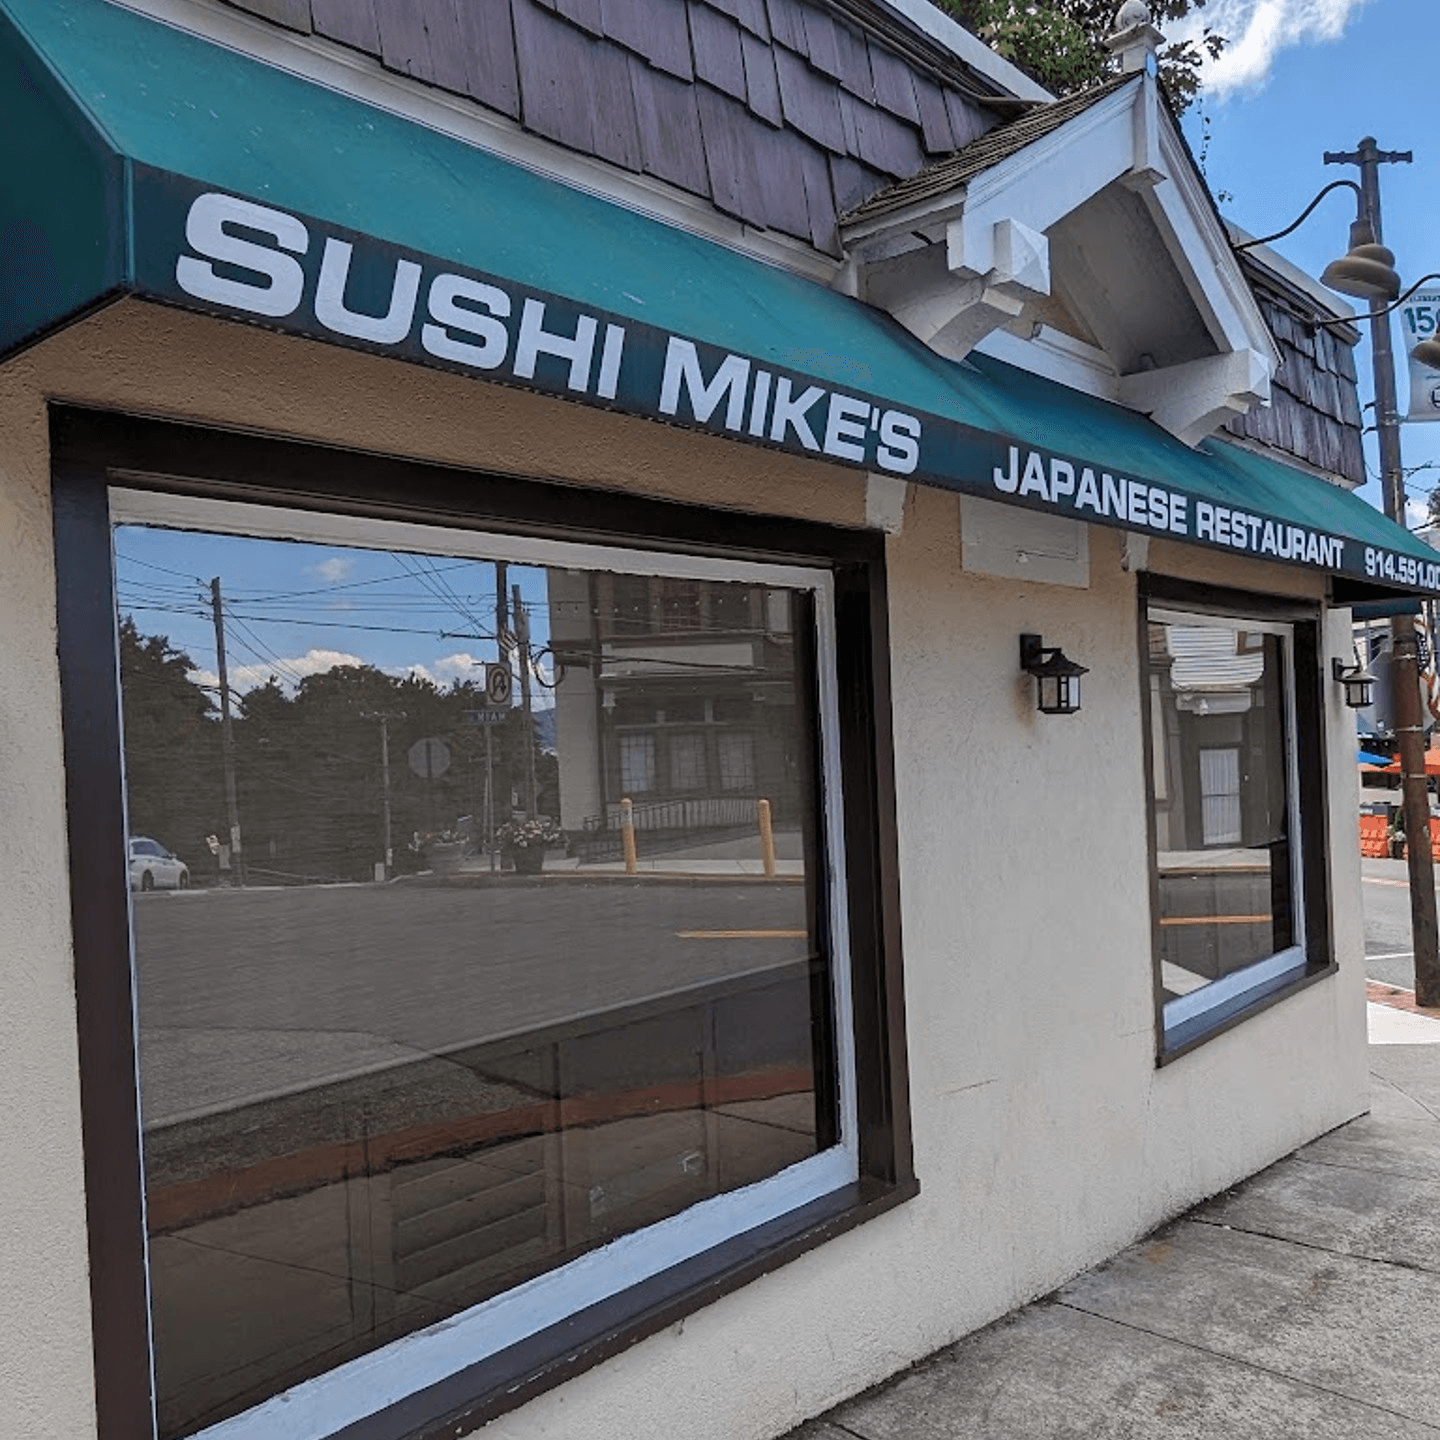 Welcome to Sushi Mike's Japanese Restaurant